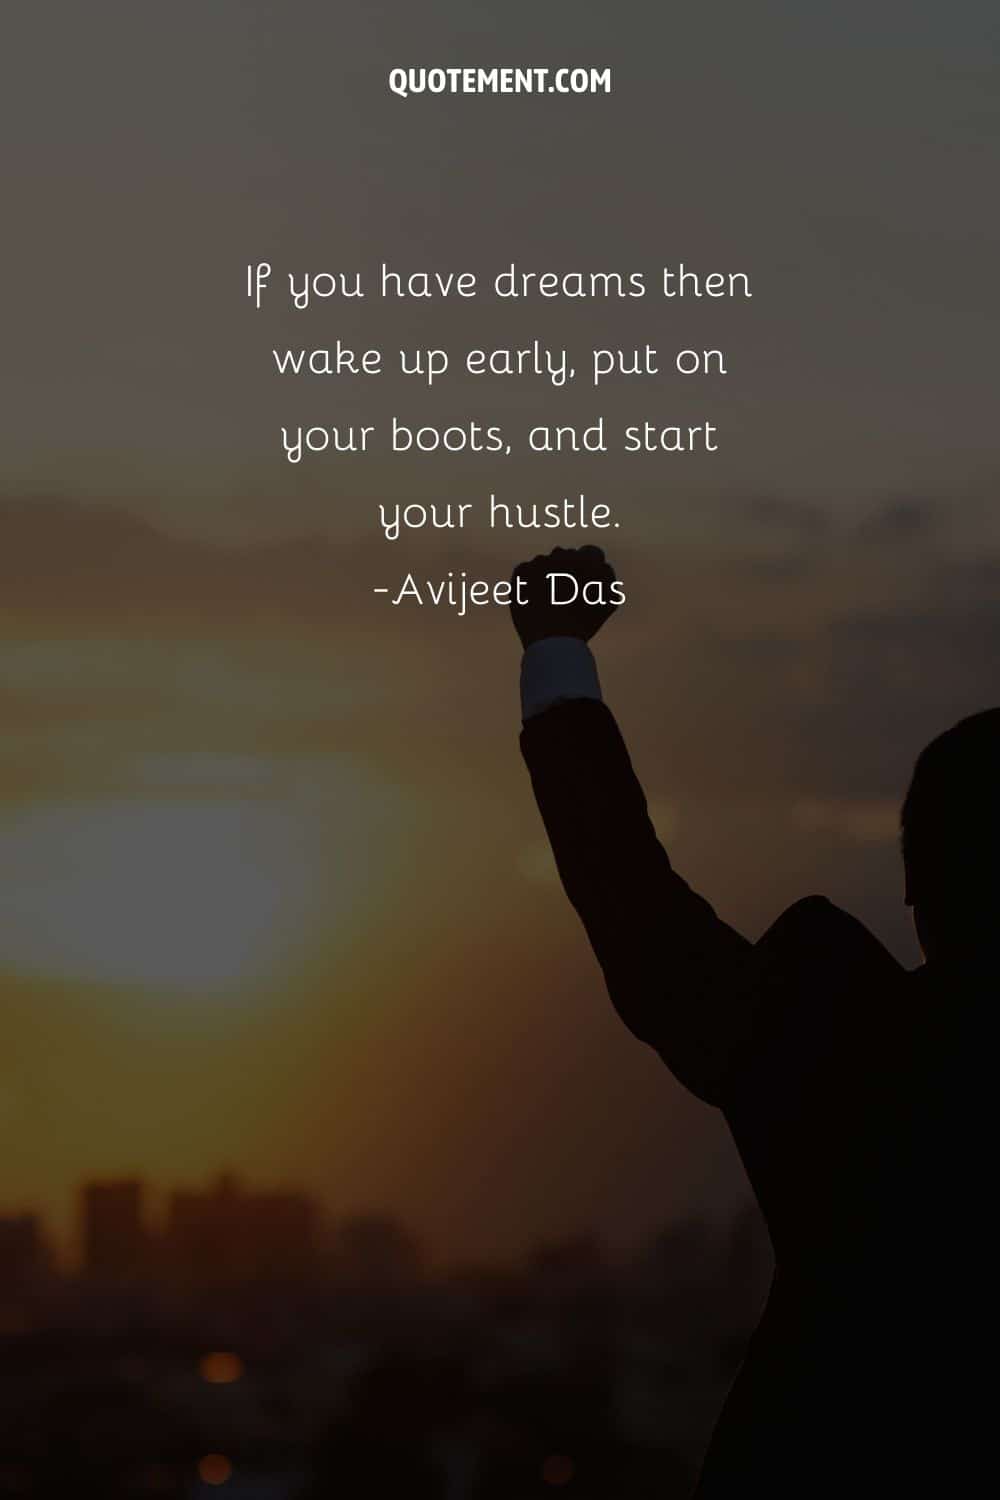 a man with raised hand image representing hustle focus quote